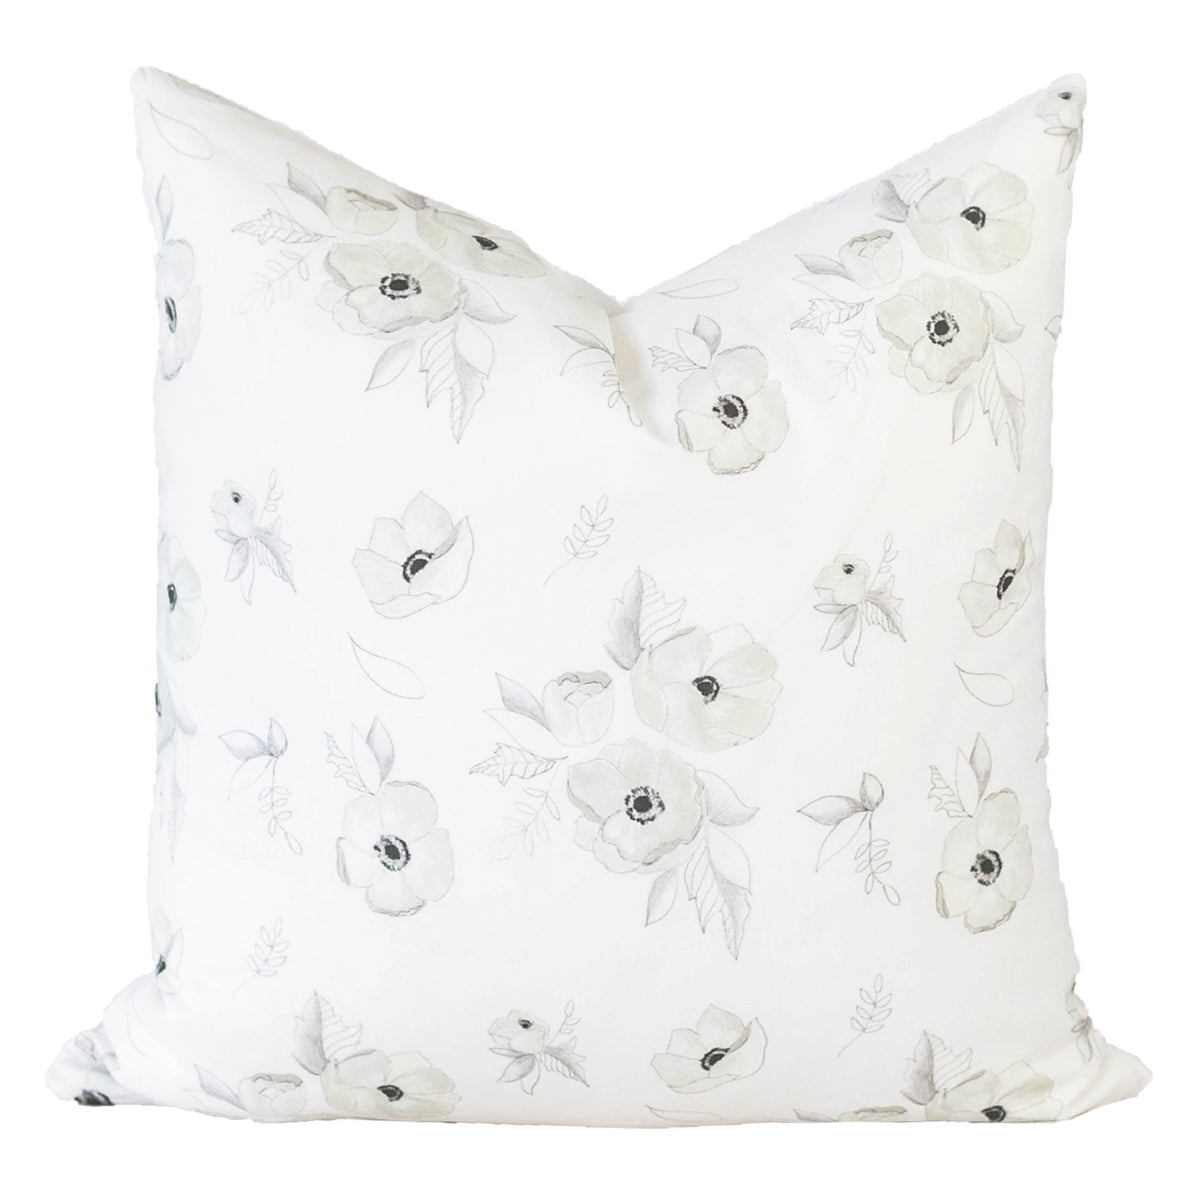 Emmy Pillow Cover